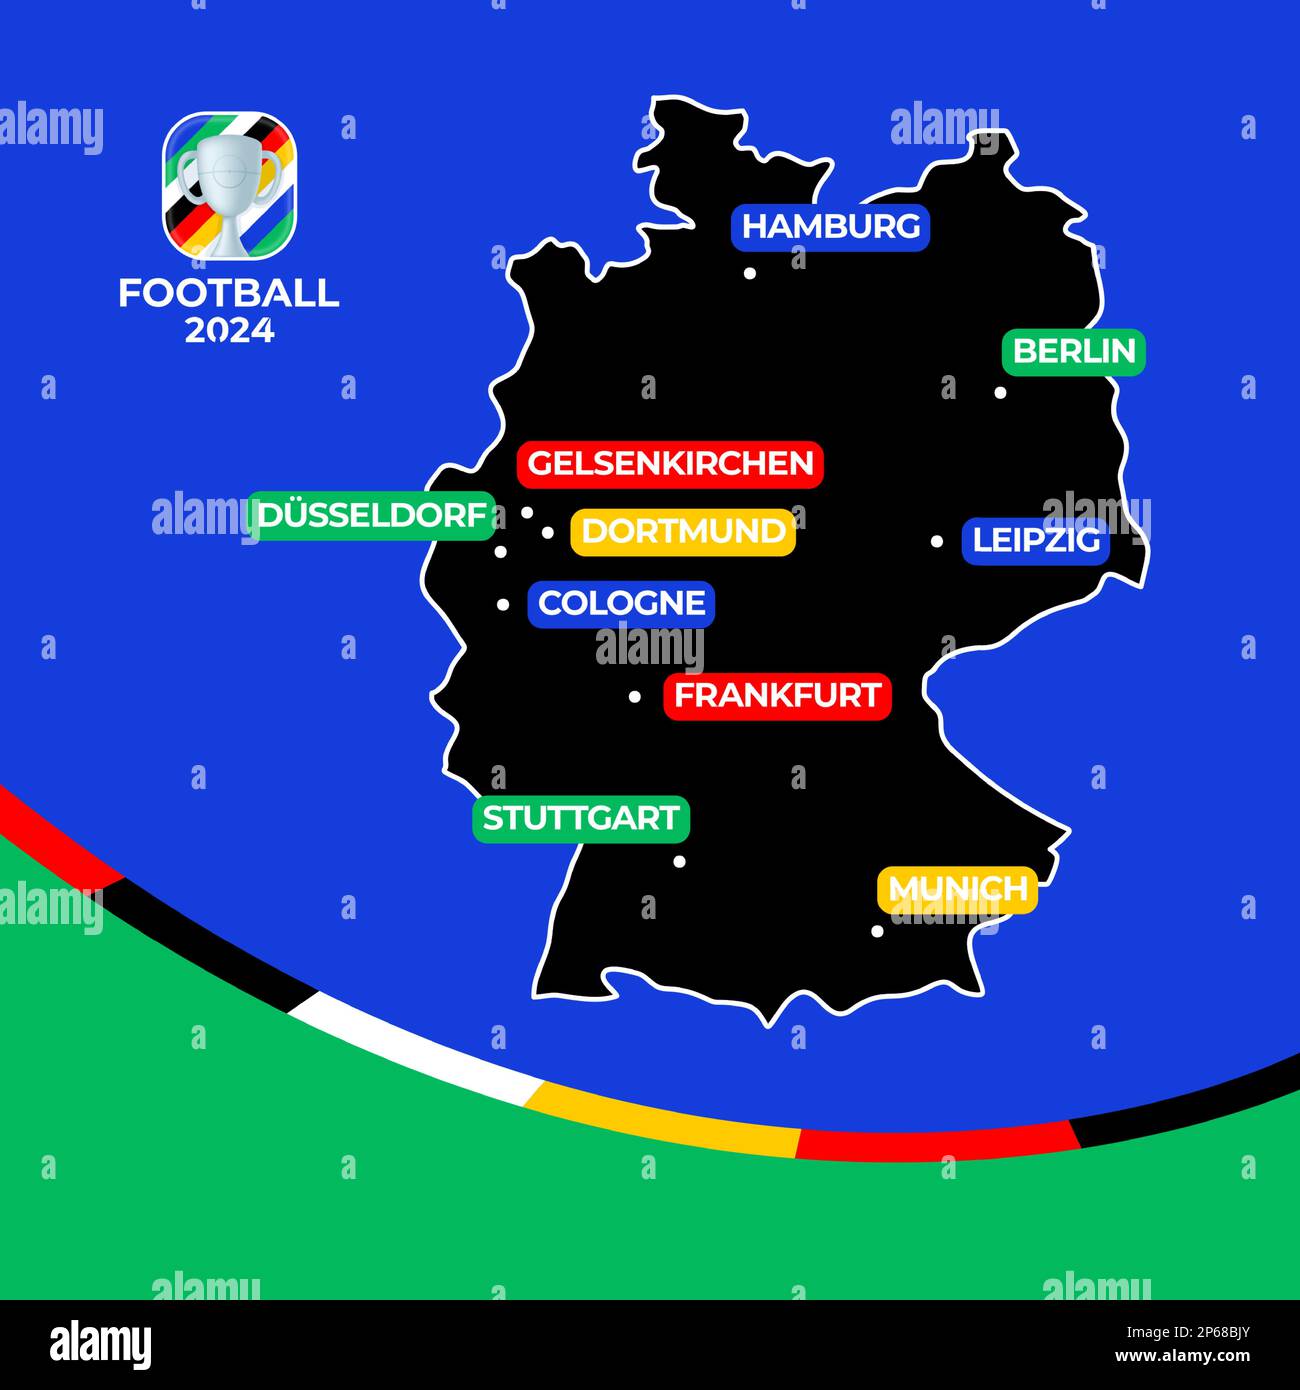 Football 2024 Host Cities Vector Map Of Germany With Cities Hosting The European Football Championship 2024 2P68BJY 